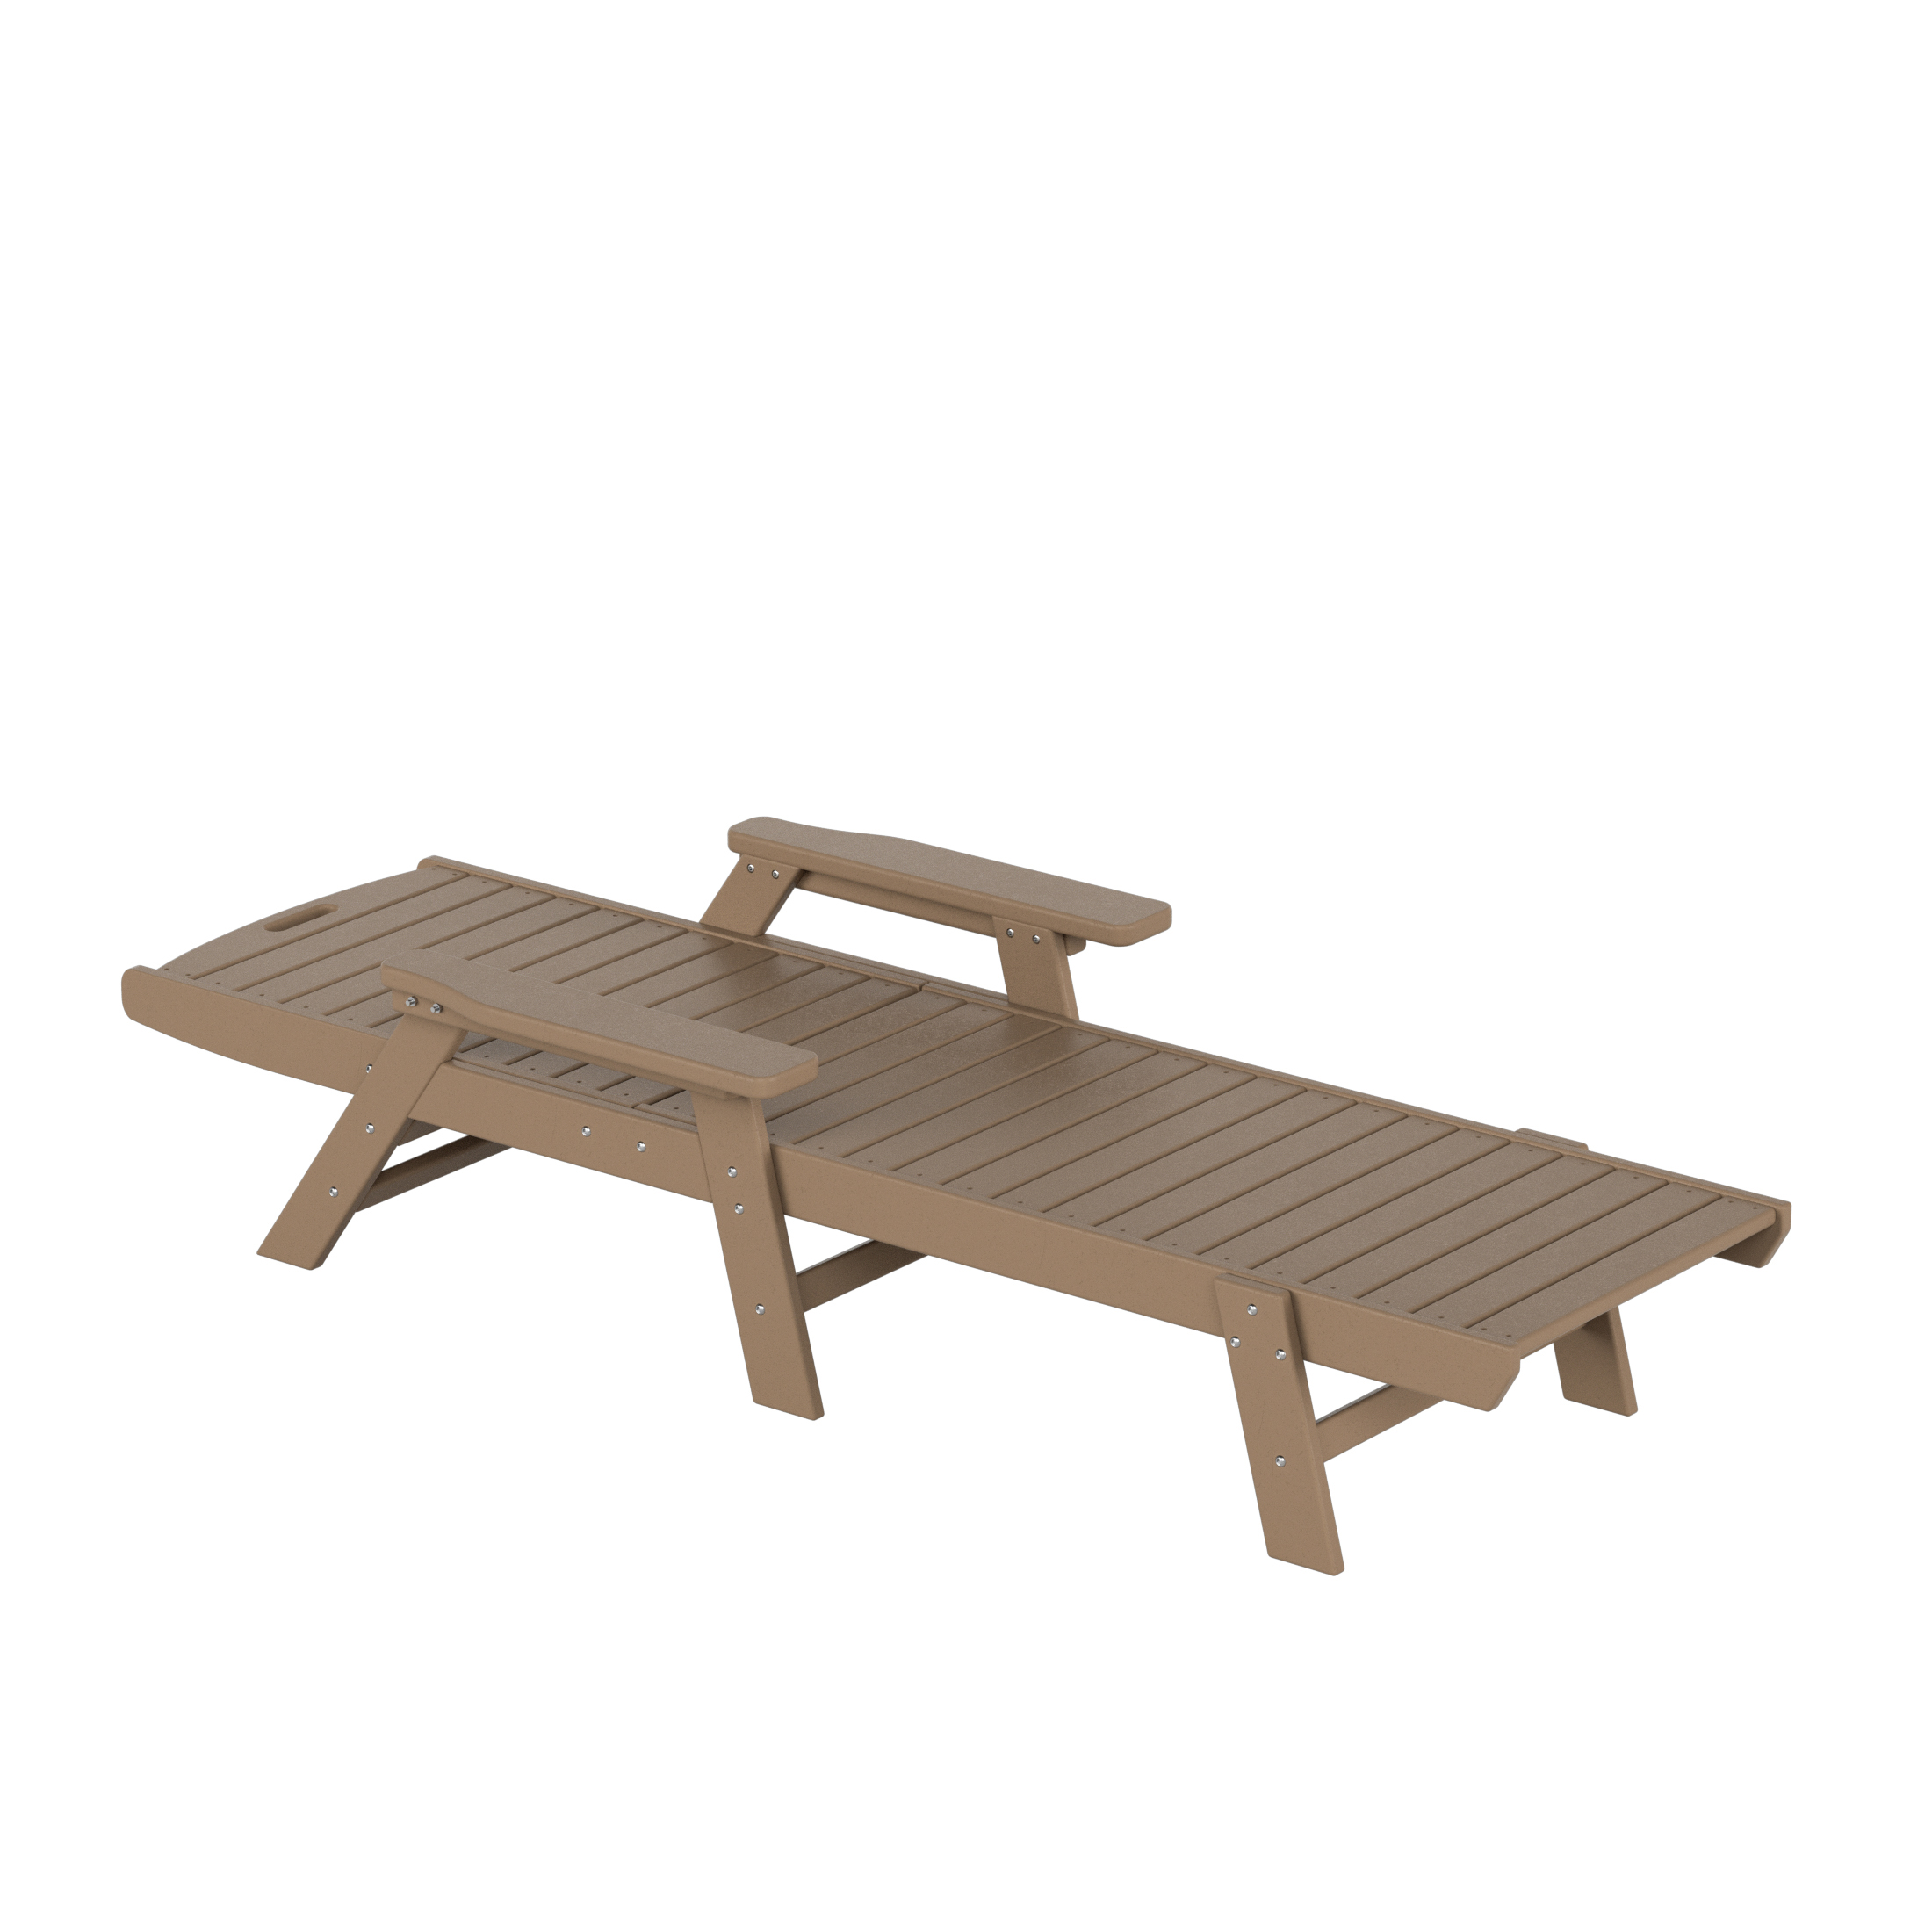 GARDEN Set of 2 Patio Outdoor Chaise Lounge Chair, Weathered Wood - image 5 of 8